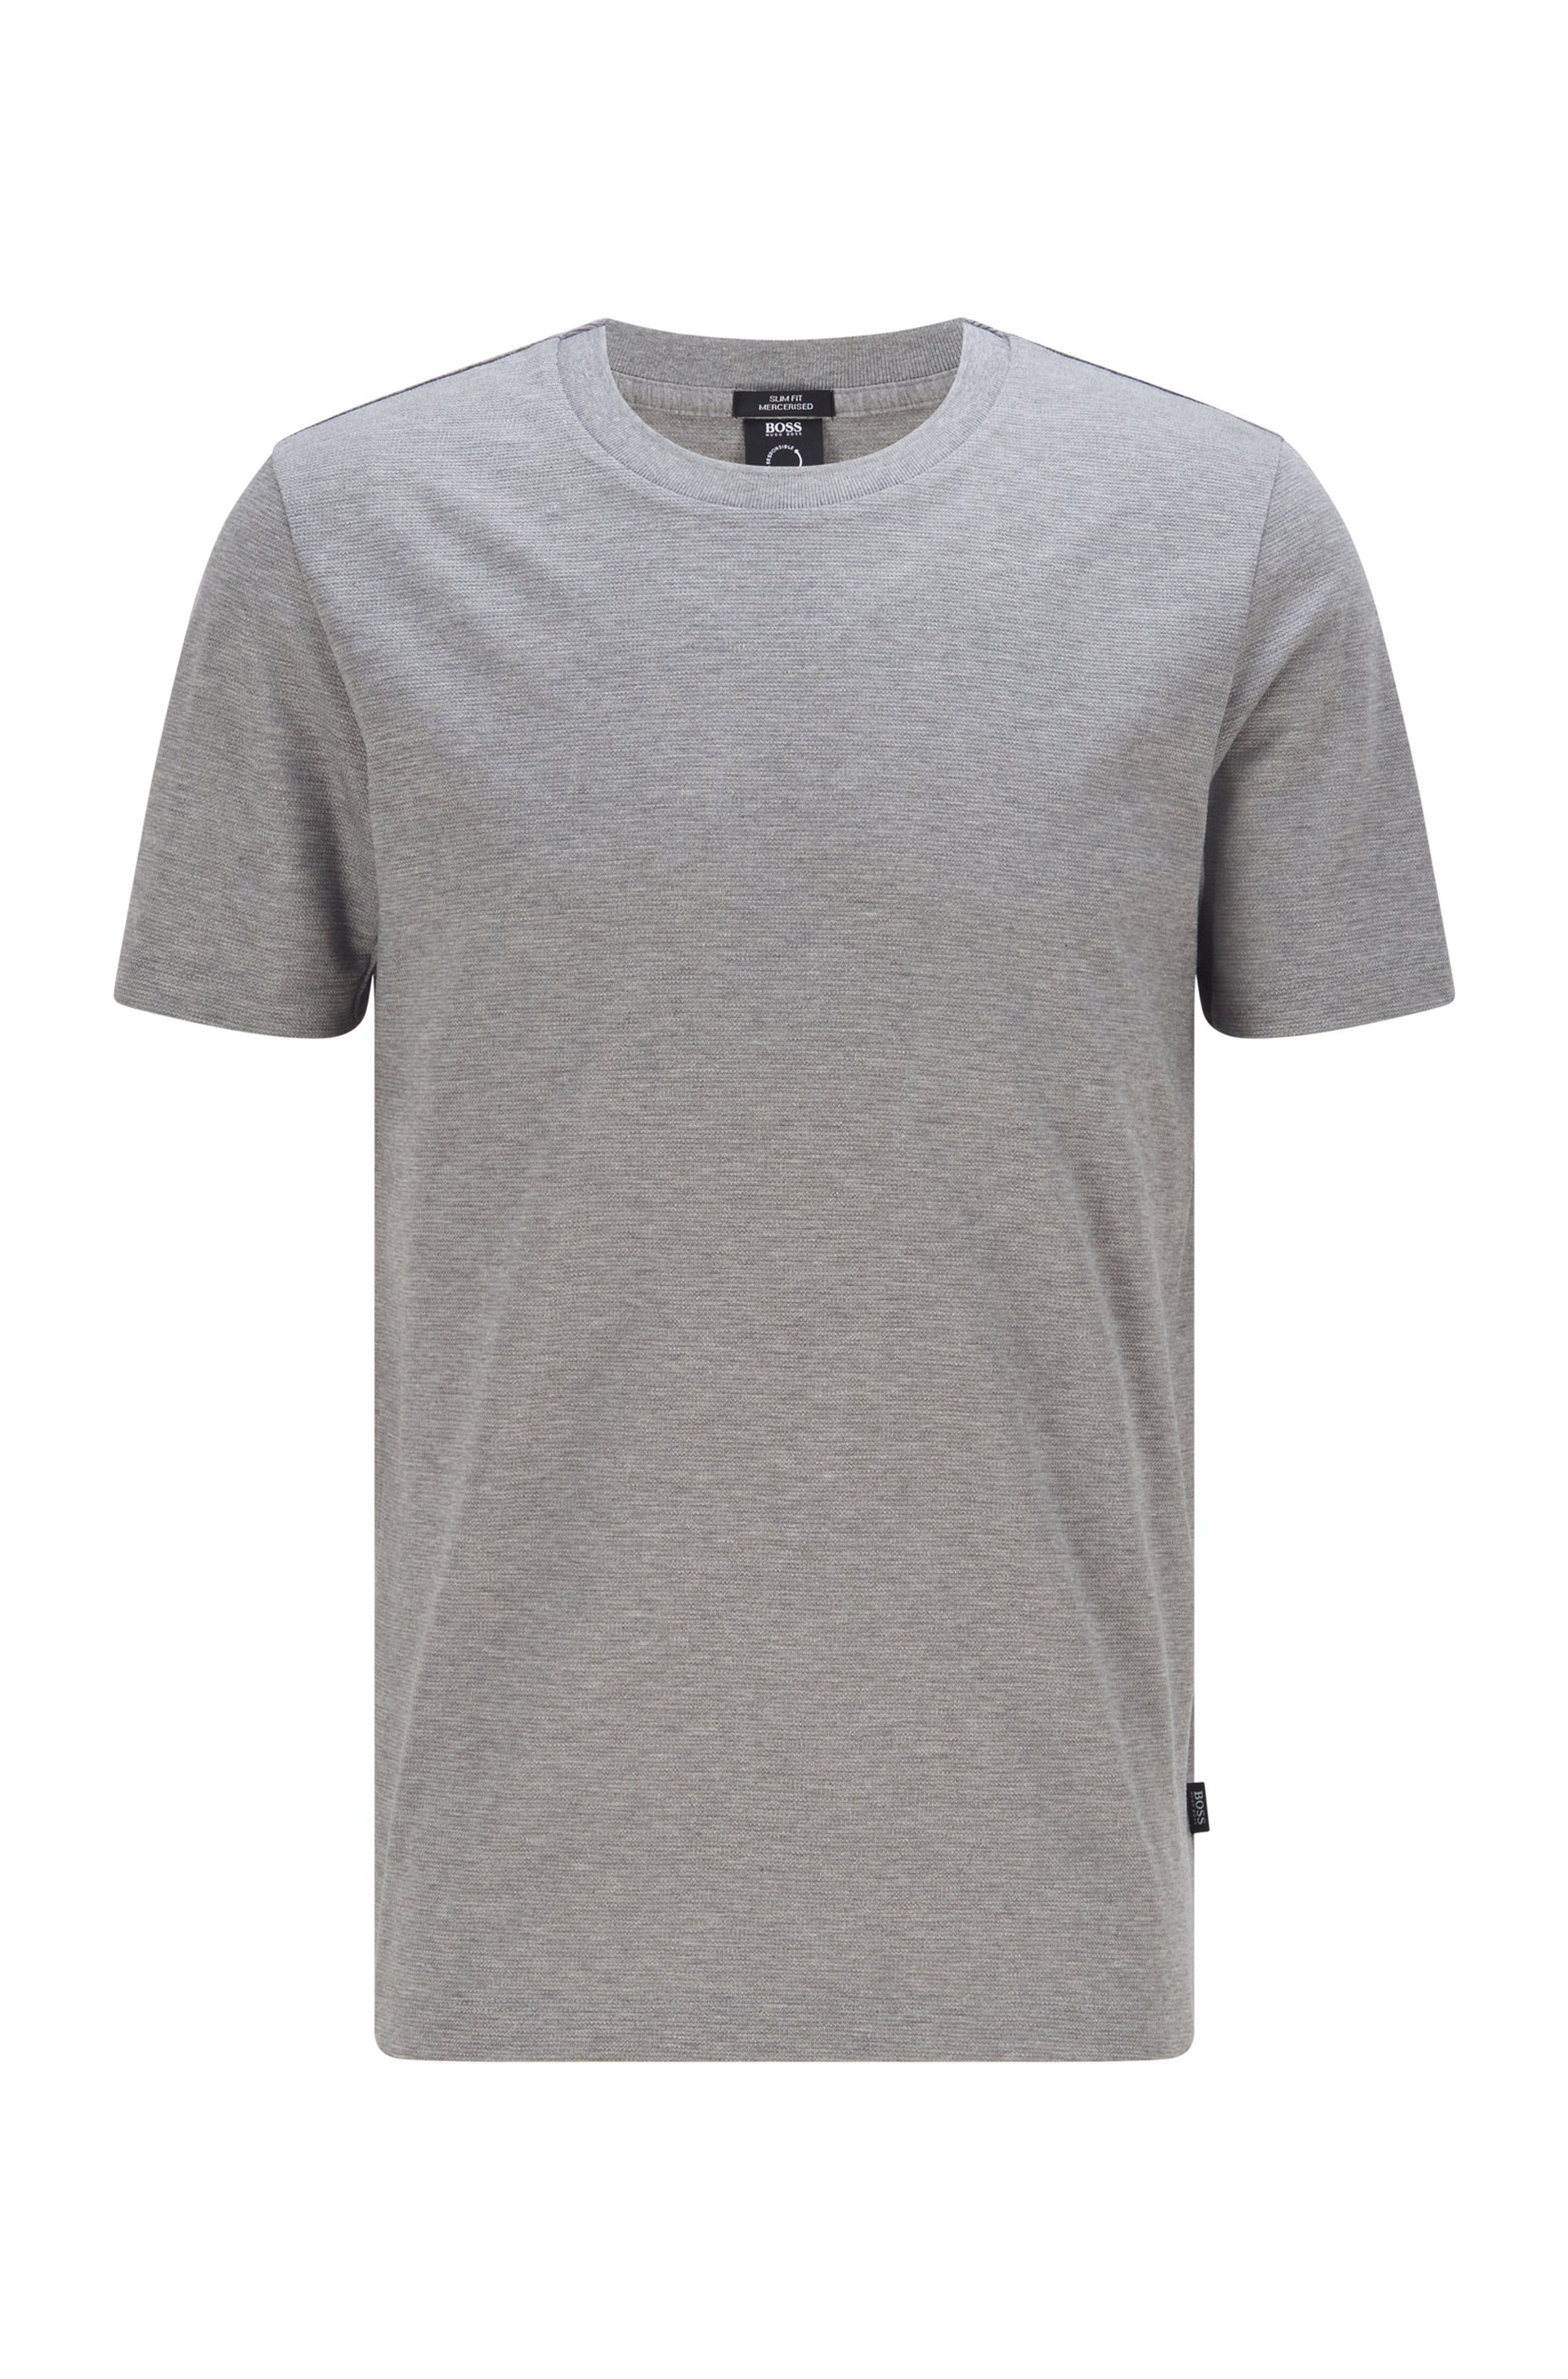 Slim-fit T-shirt in an organic-cotton blend, Silver